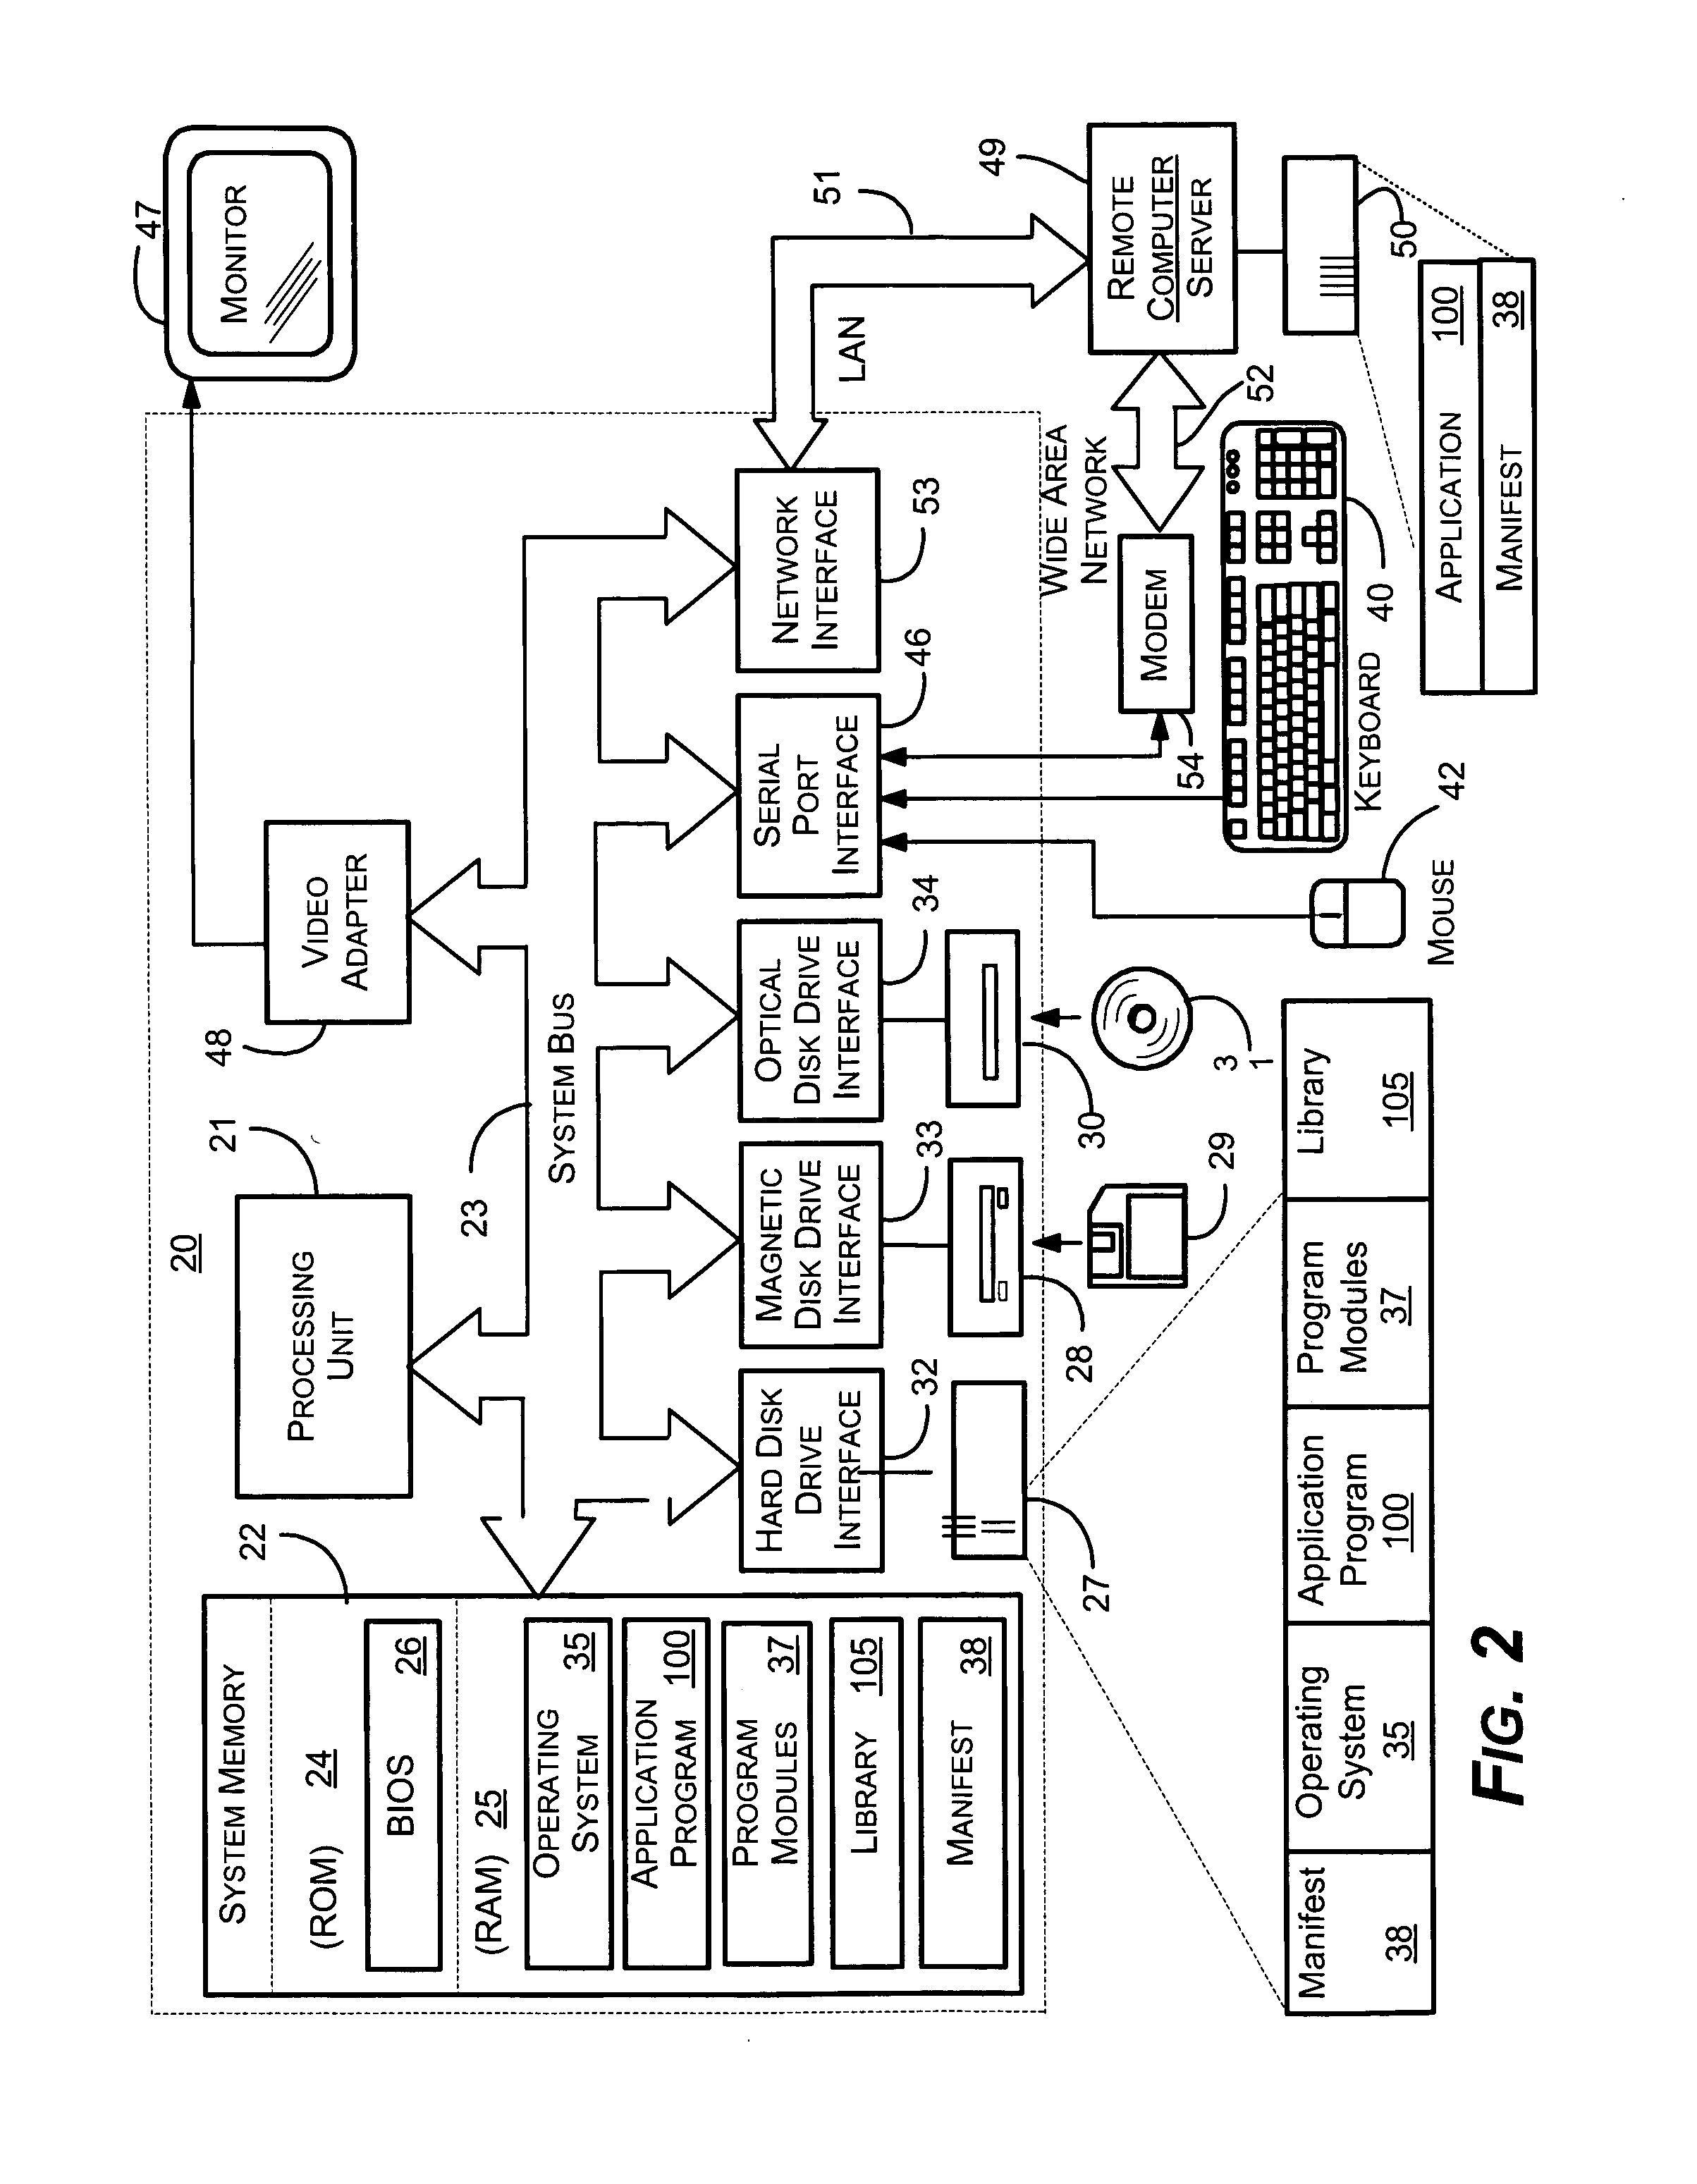 Mechanism for downloading software components from a remote source for use by a local software application